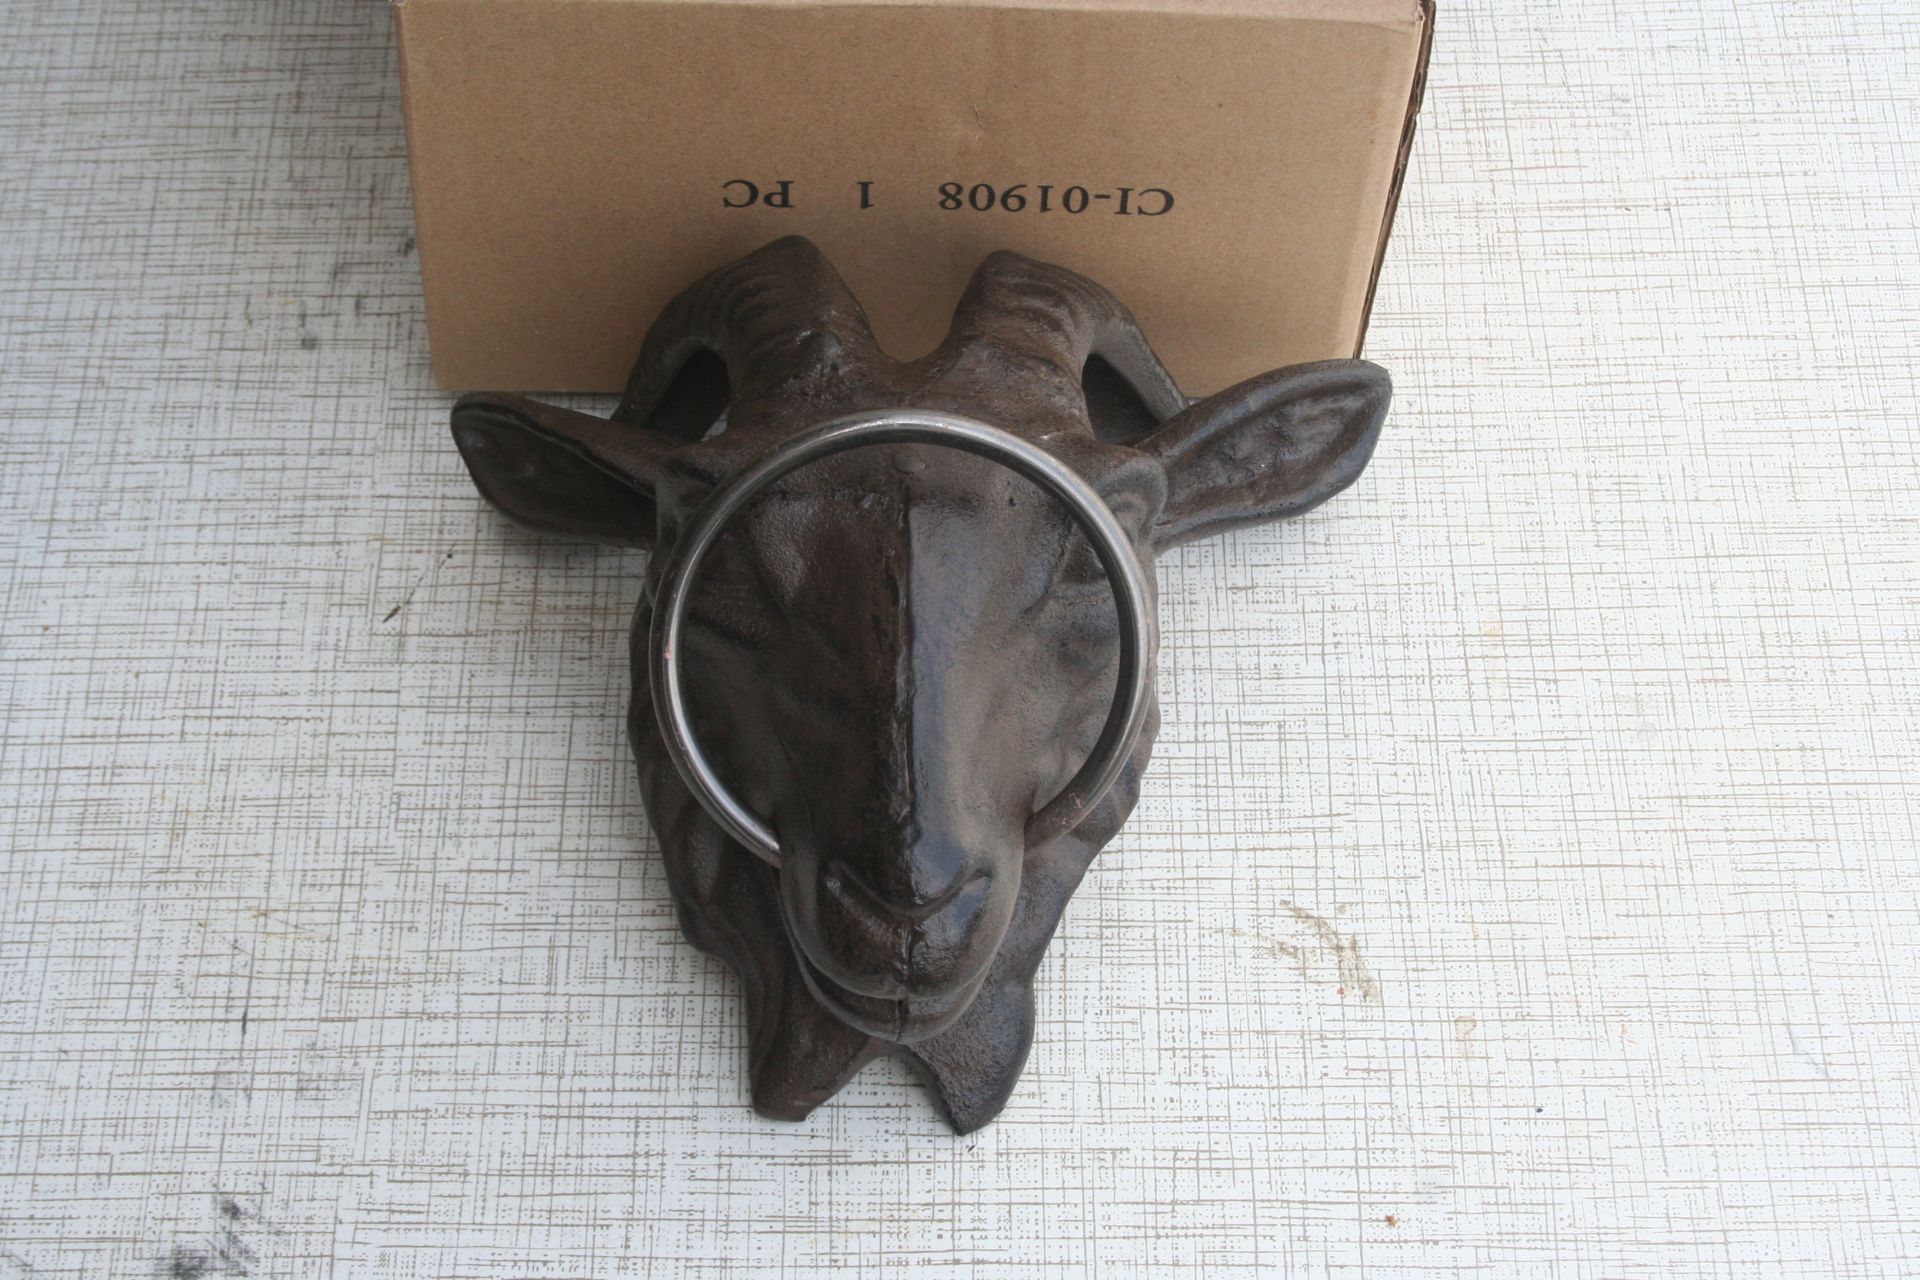 Goat head with ring